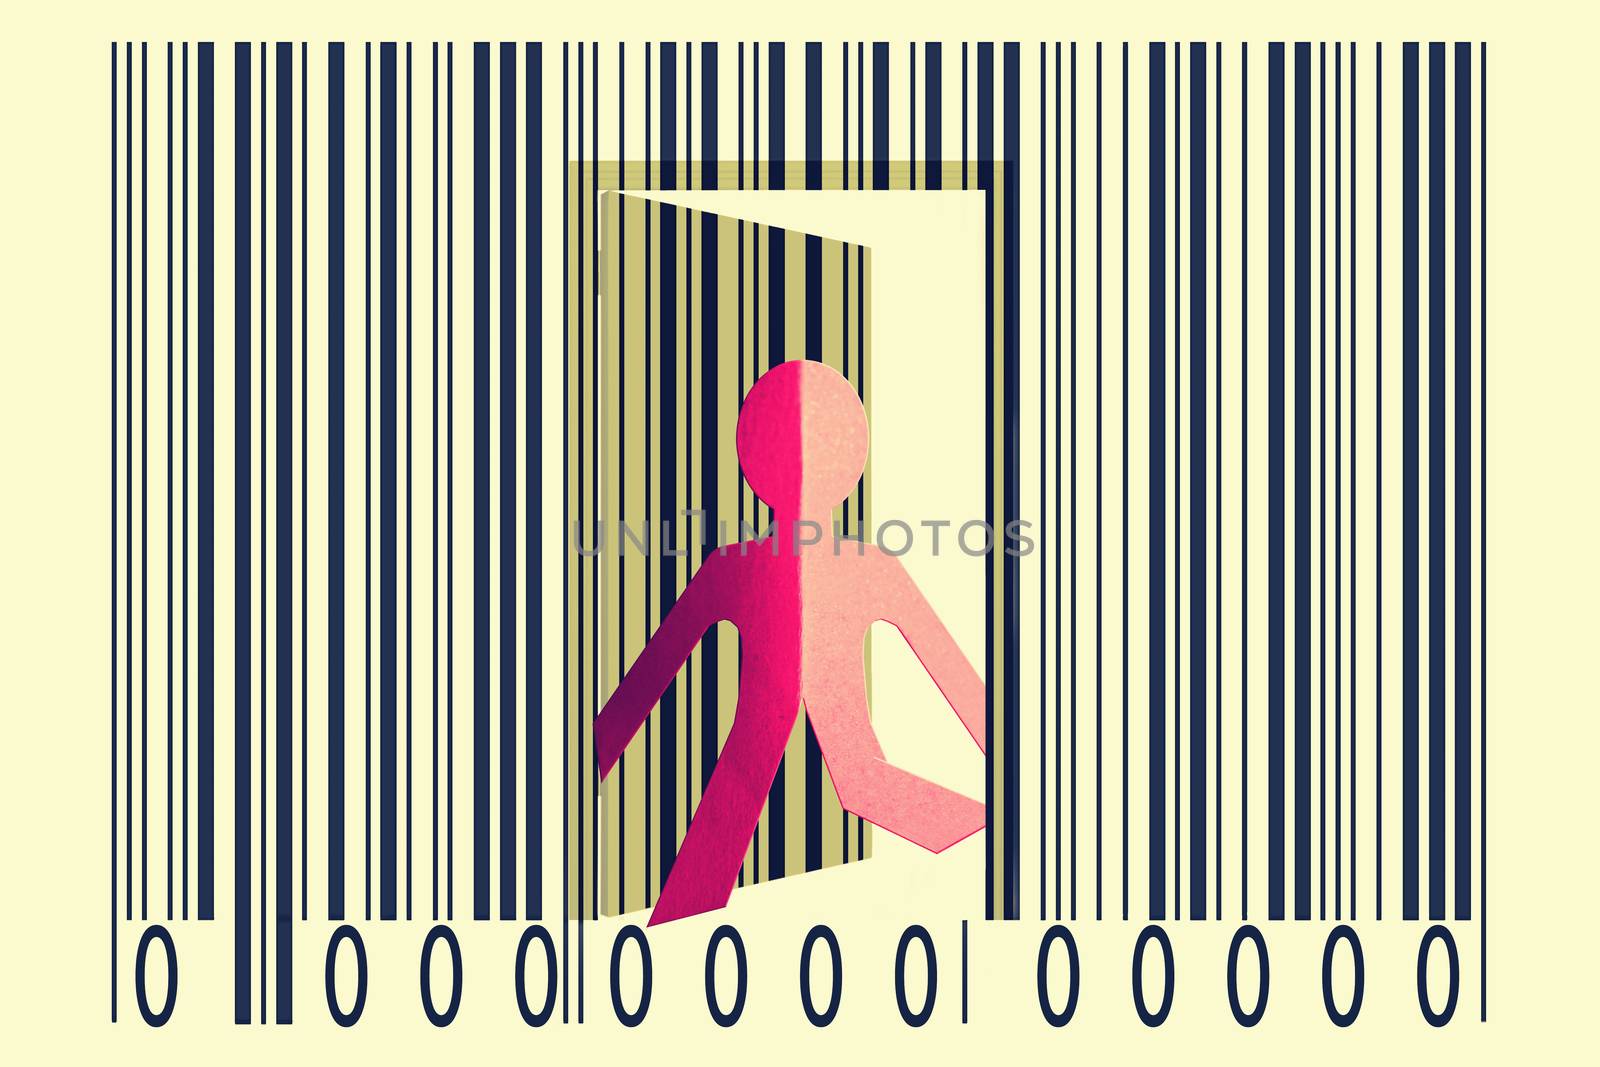 Paperman coming out of a bar code to go out